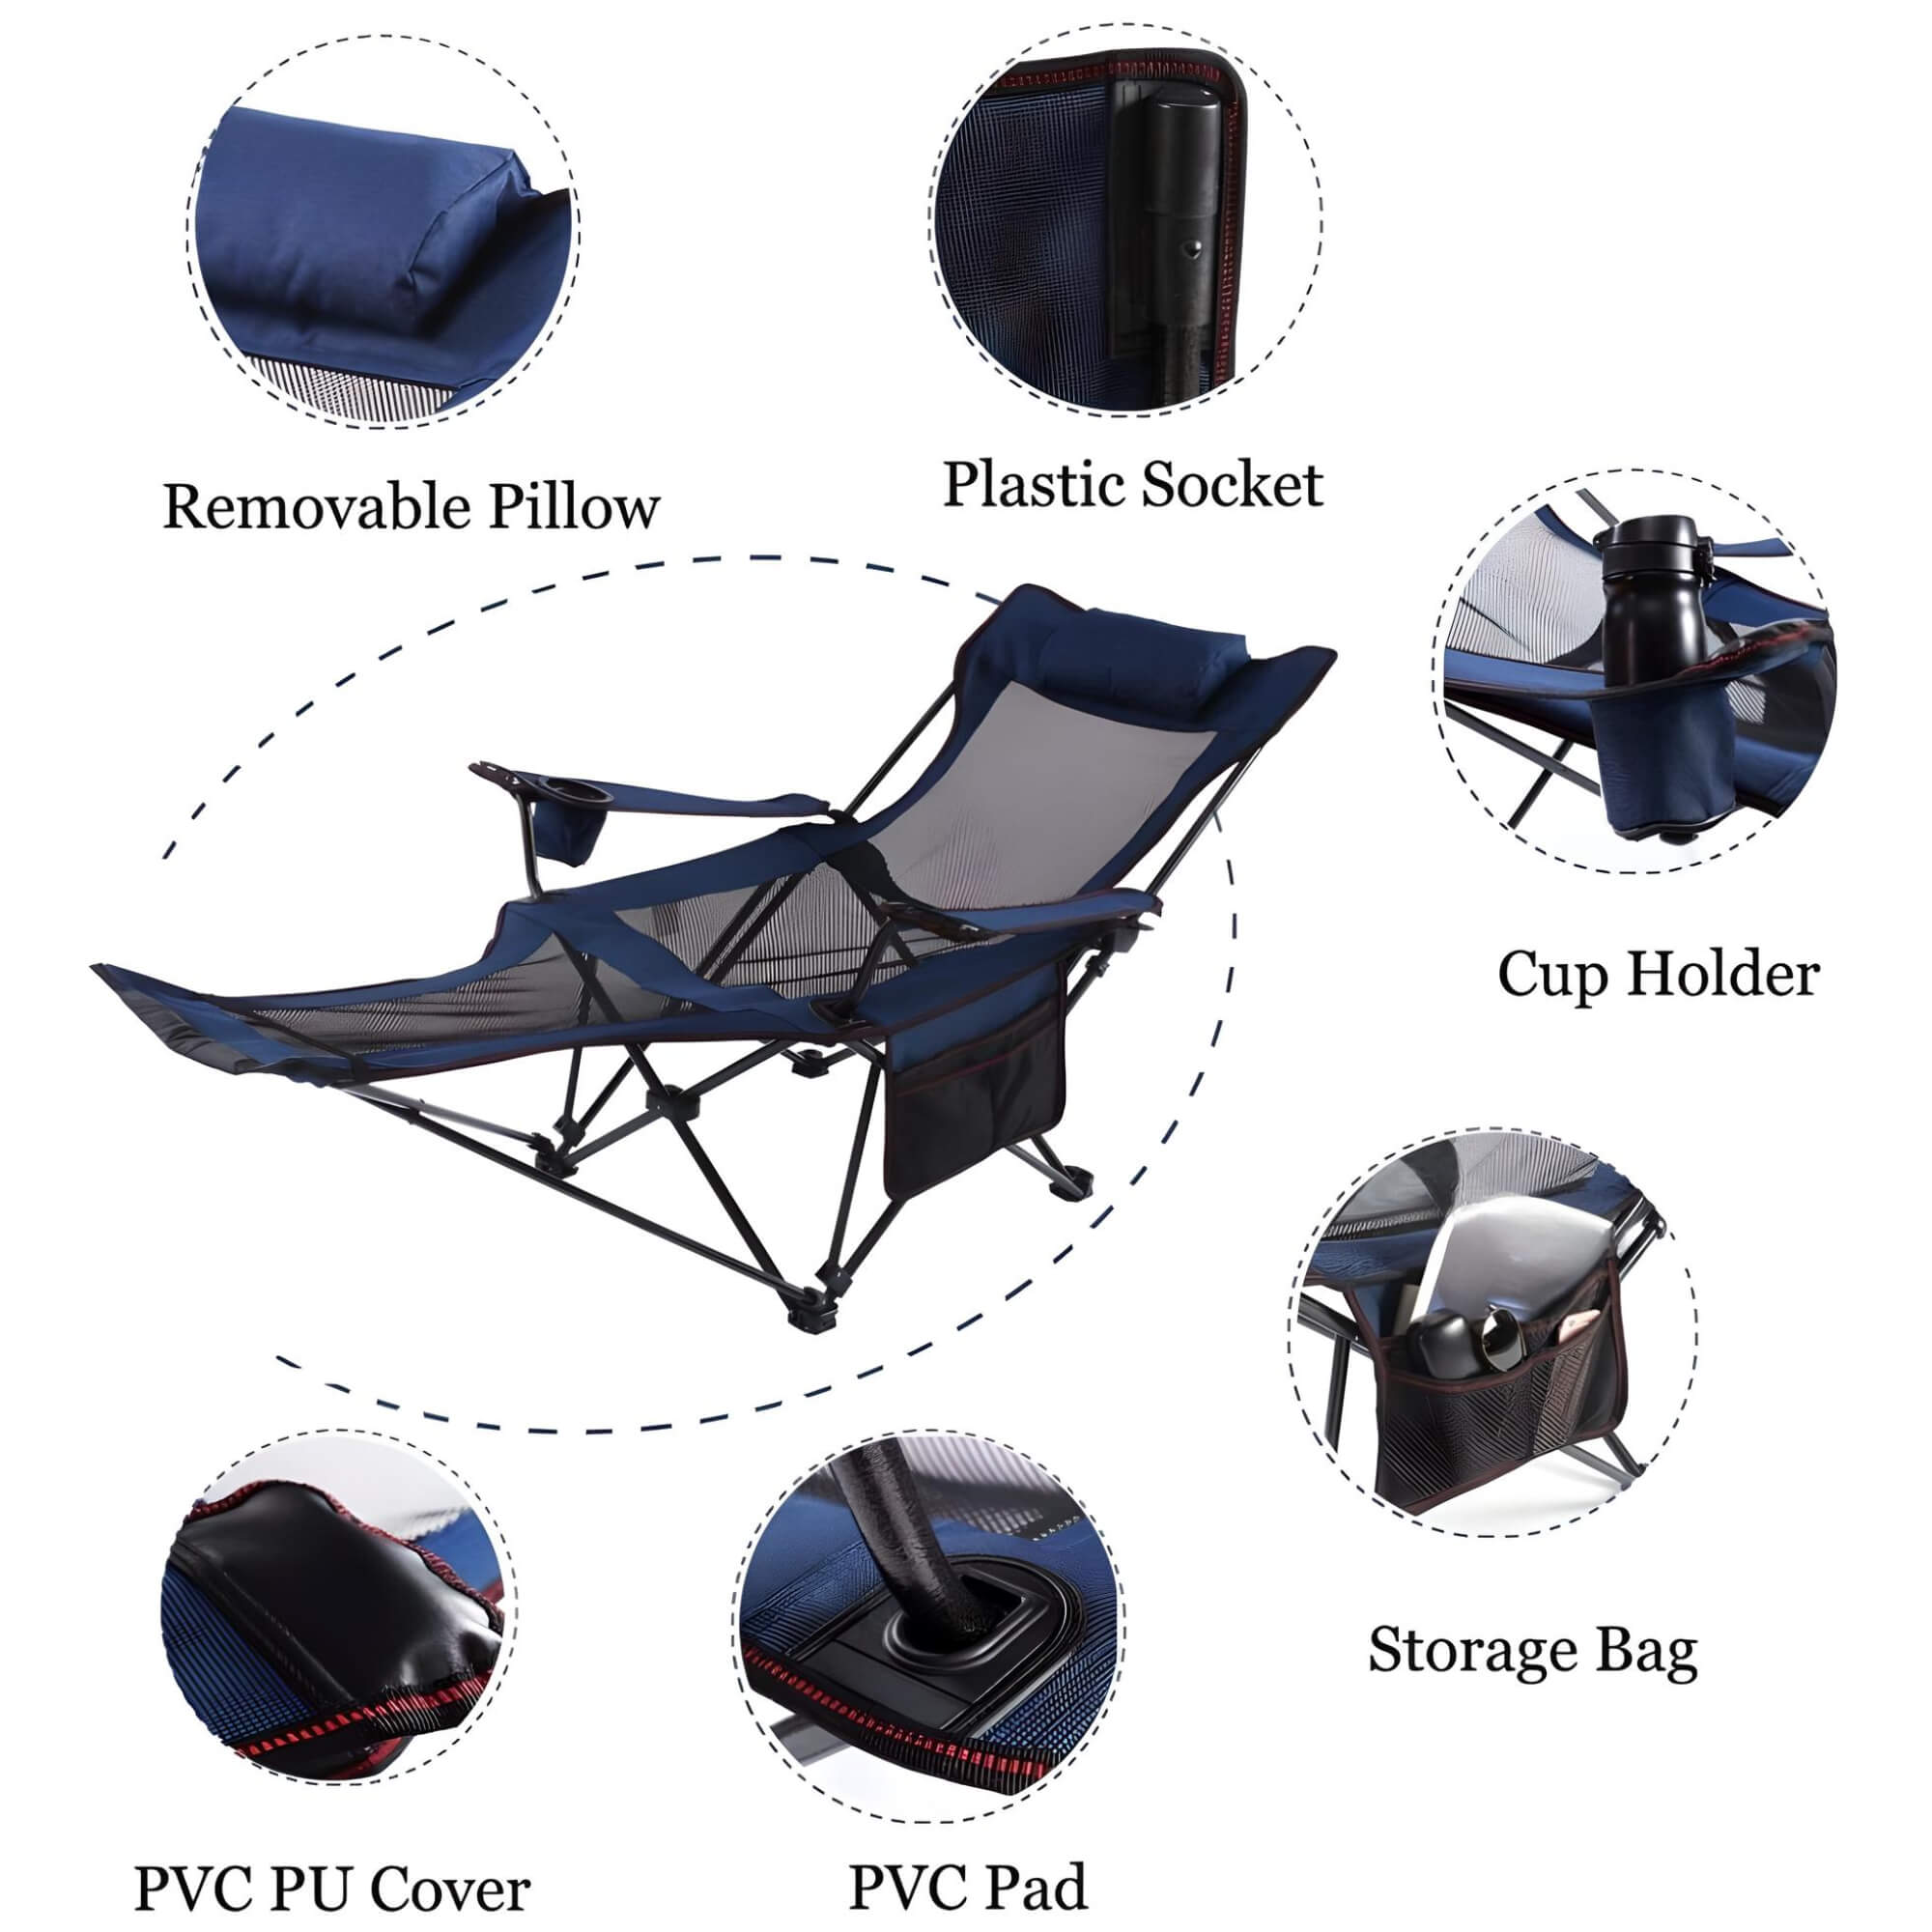 mesh-folding-lawn-chairs-specification